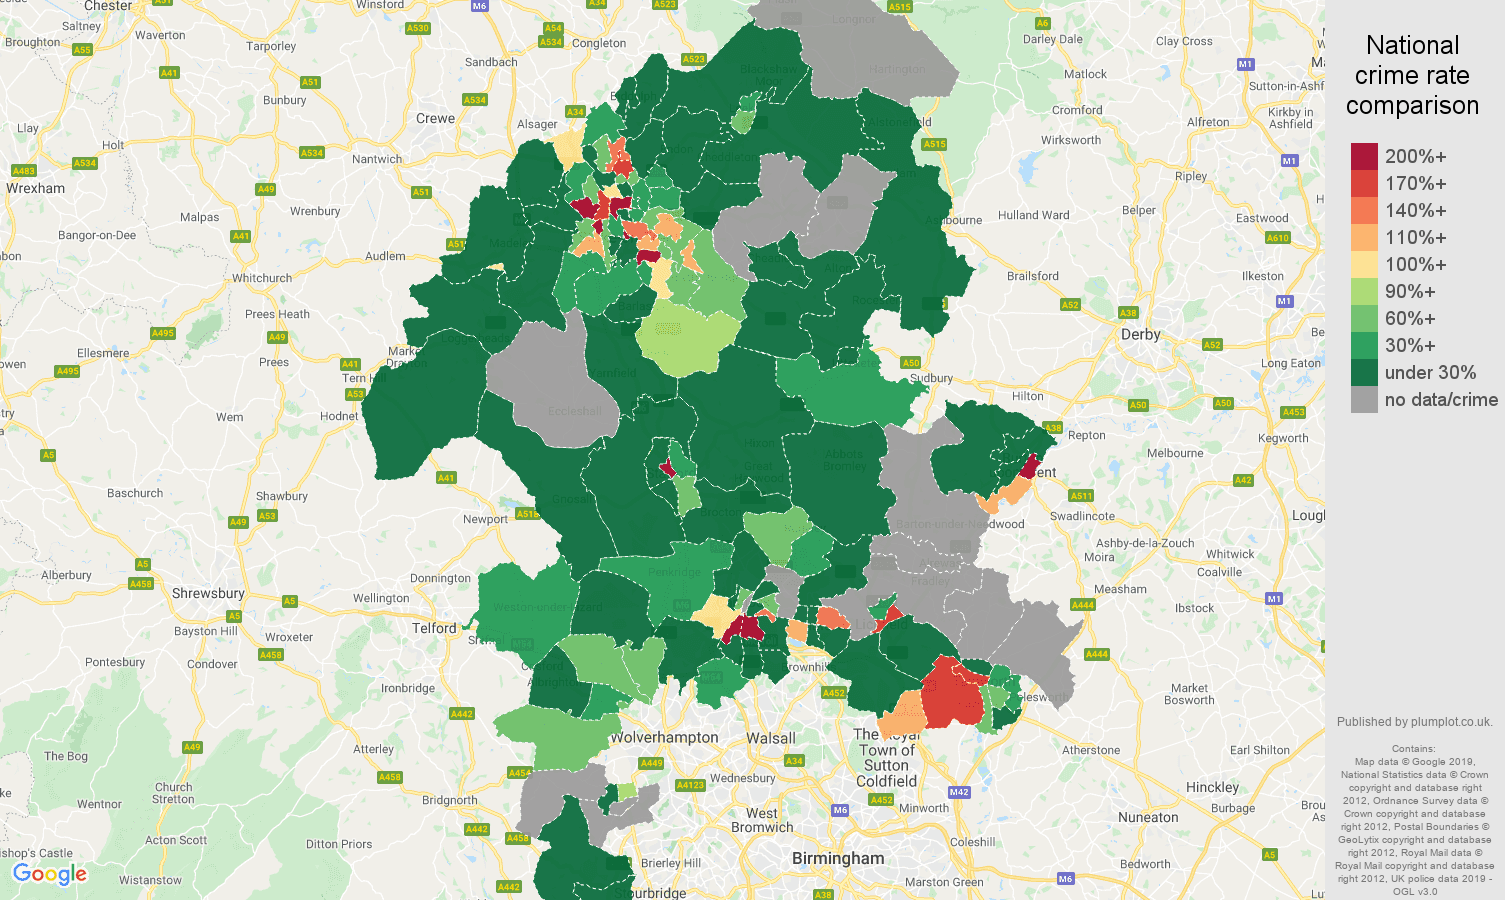 Staffordshire shoplifting crime rate comparison map